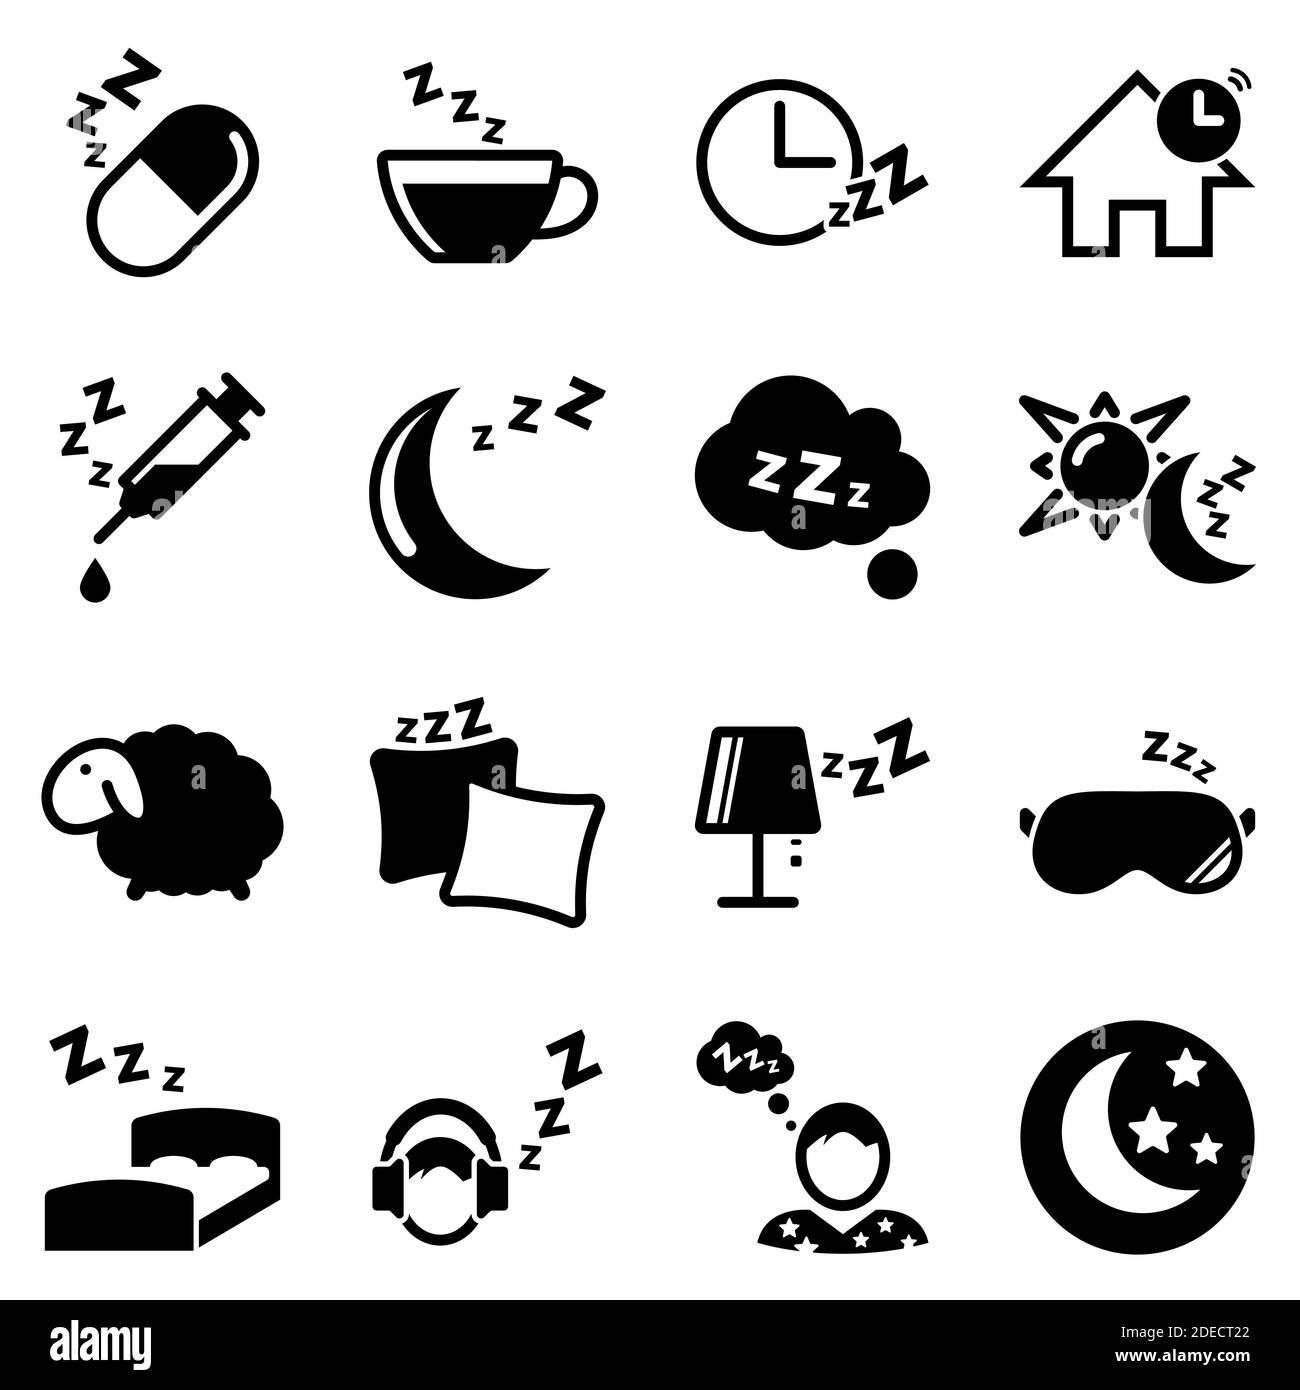 Set of simple icons on a theme Sleep, bedroom, house, lighting, night, vector, set, flat, sign, symbol, object. Black icons isolated against white bac Stock Vector